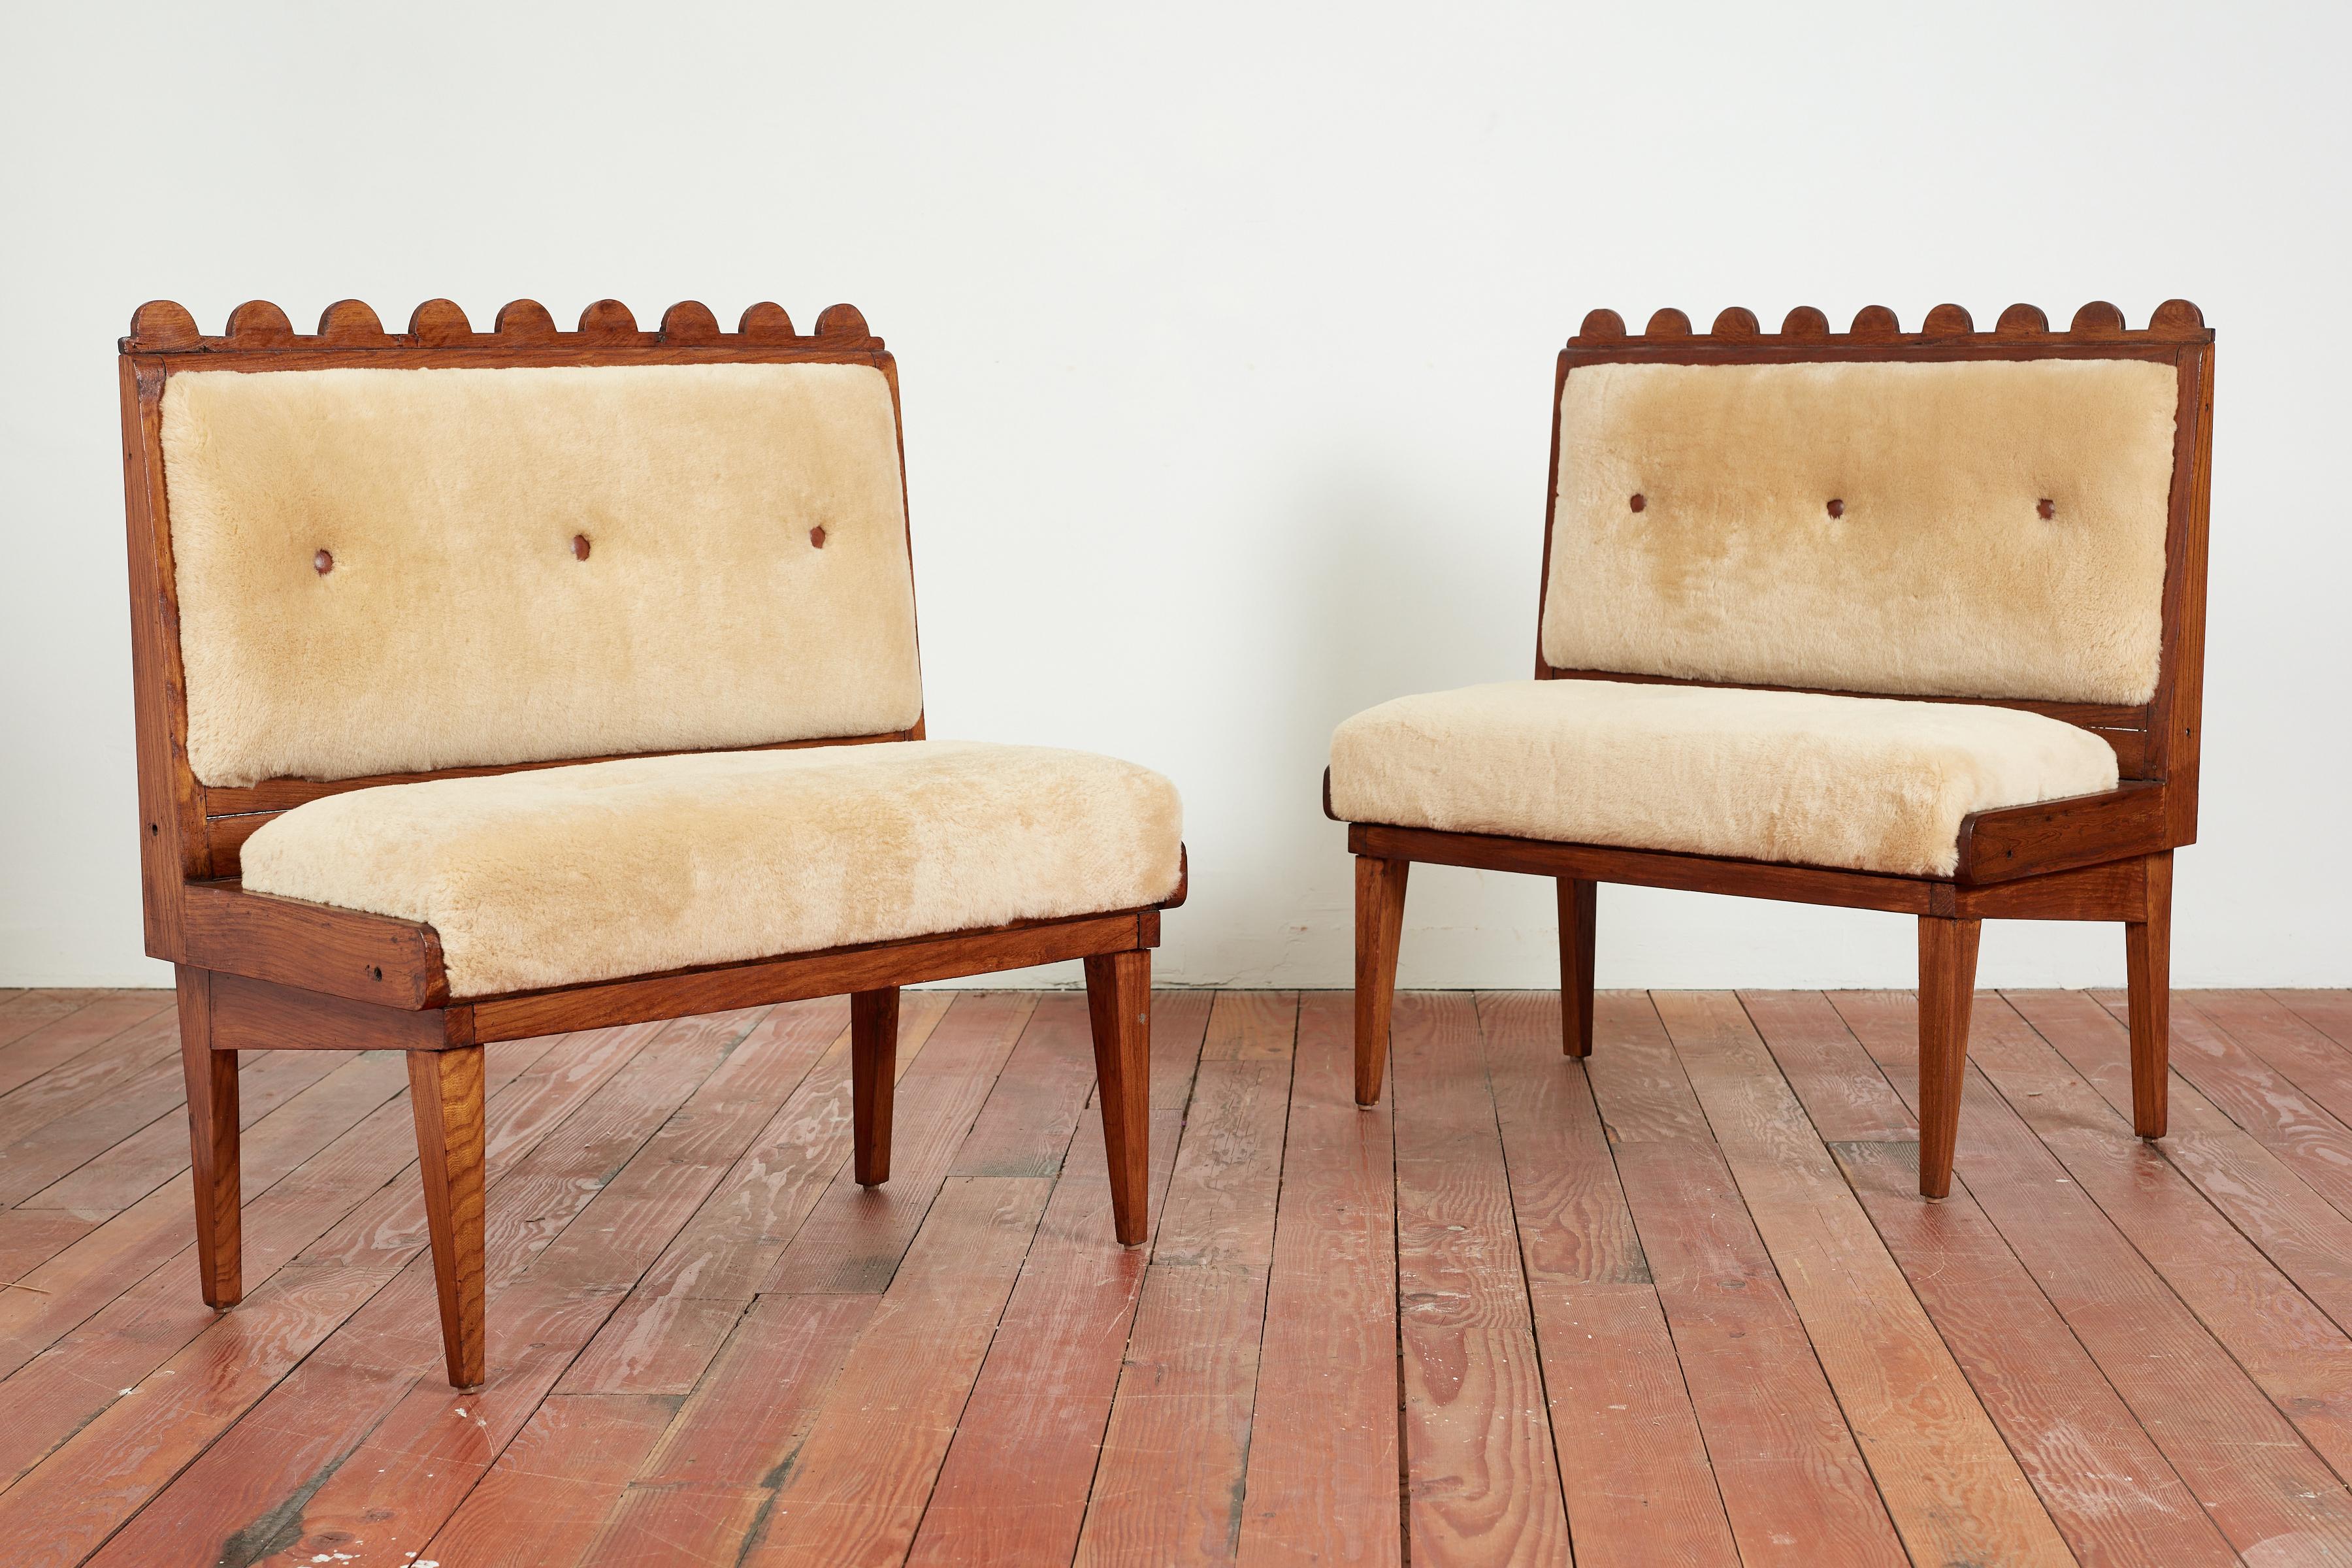 Pair of Paolo Buffa attributed benches in chestnut wood with signature scalloped edge

Reupoholstered in camel shearling and leather button tufting

Seat hinges open to reveal storage. 

Wonderful pair - sold as a pair

France, 1950s.